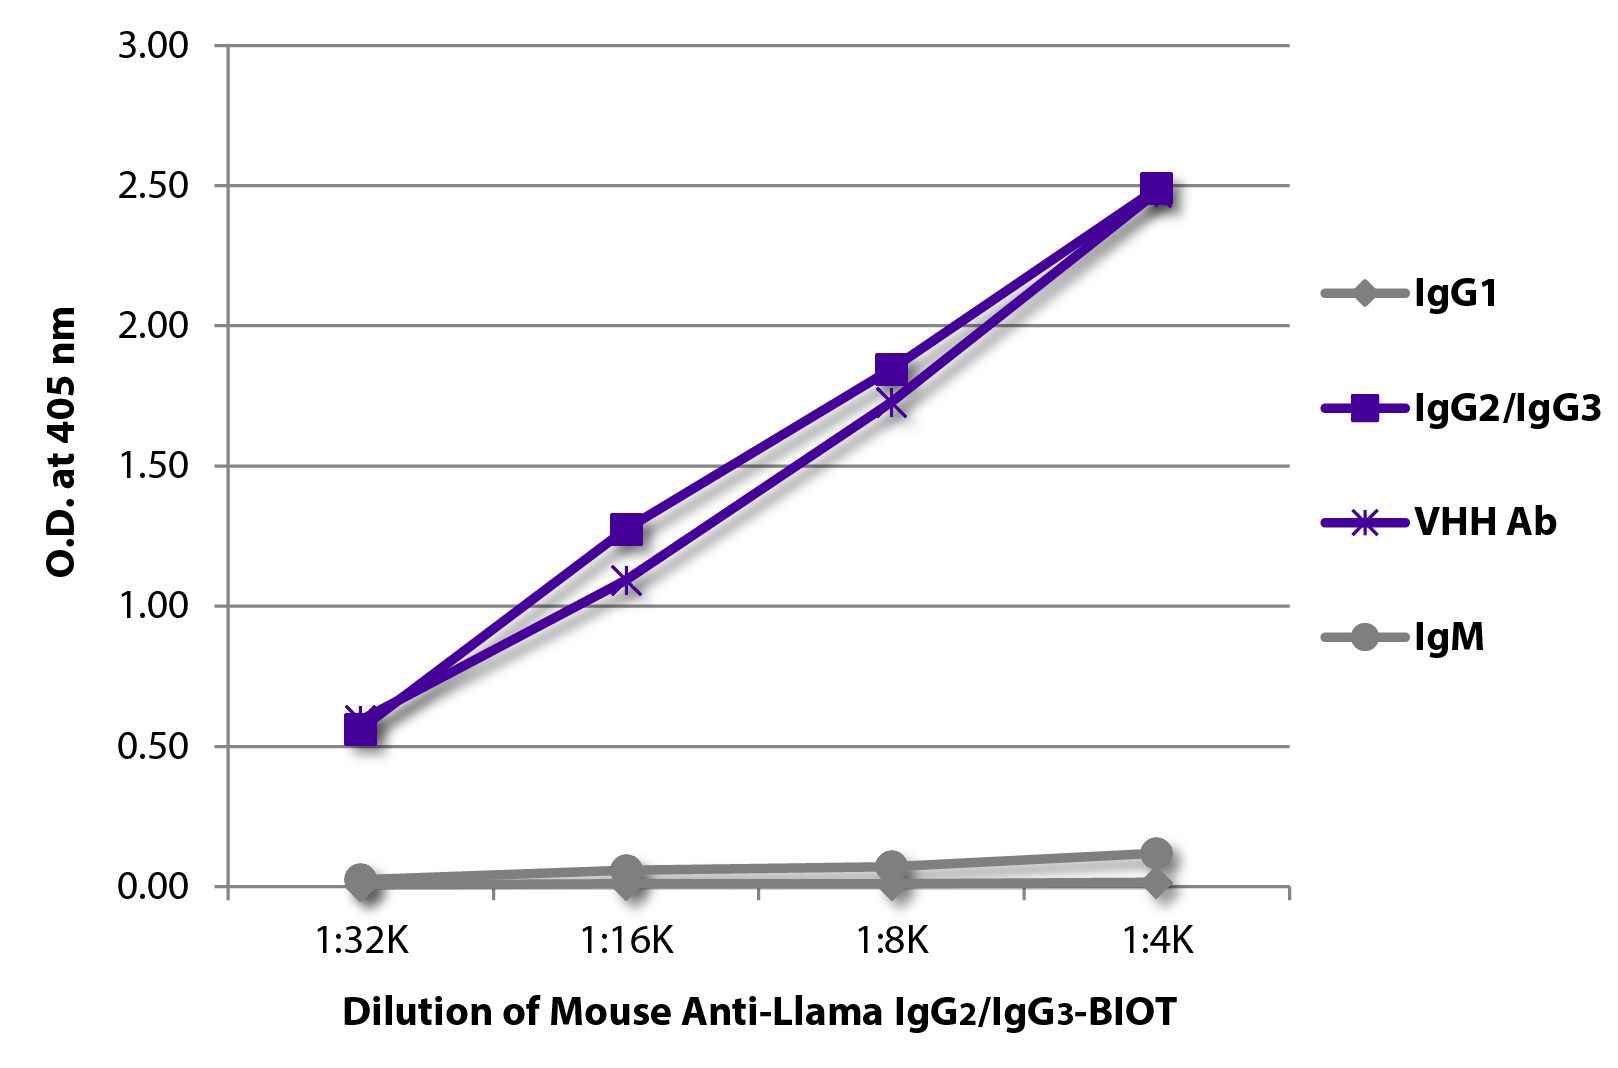 ELISA plate was coated with purified llama IgG<sub>1</sub>, IgG<sub>2</sub>/IgG<sub>3</sub>,  IgM, and a VHH antibody.  Immunoglobulins were detected with Mouse Anti-Llama IgG<sub>2</sub>/IgG<sub>3</sub>-BIOT (SB Cat. No. 5880-08) followed by Streptavidin-HRP (SB Cat. No. 7105-05).